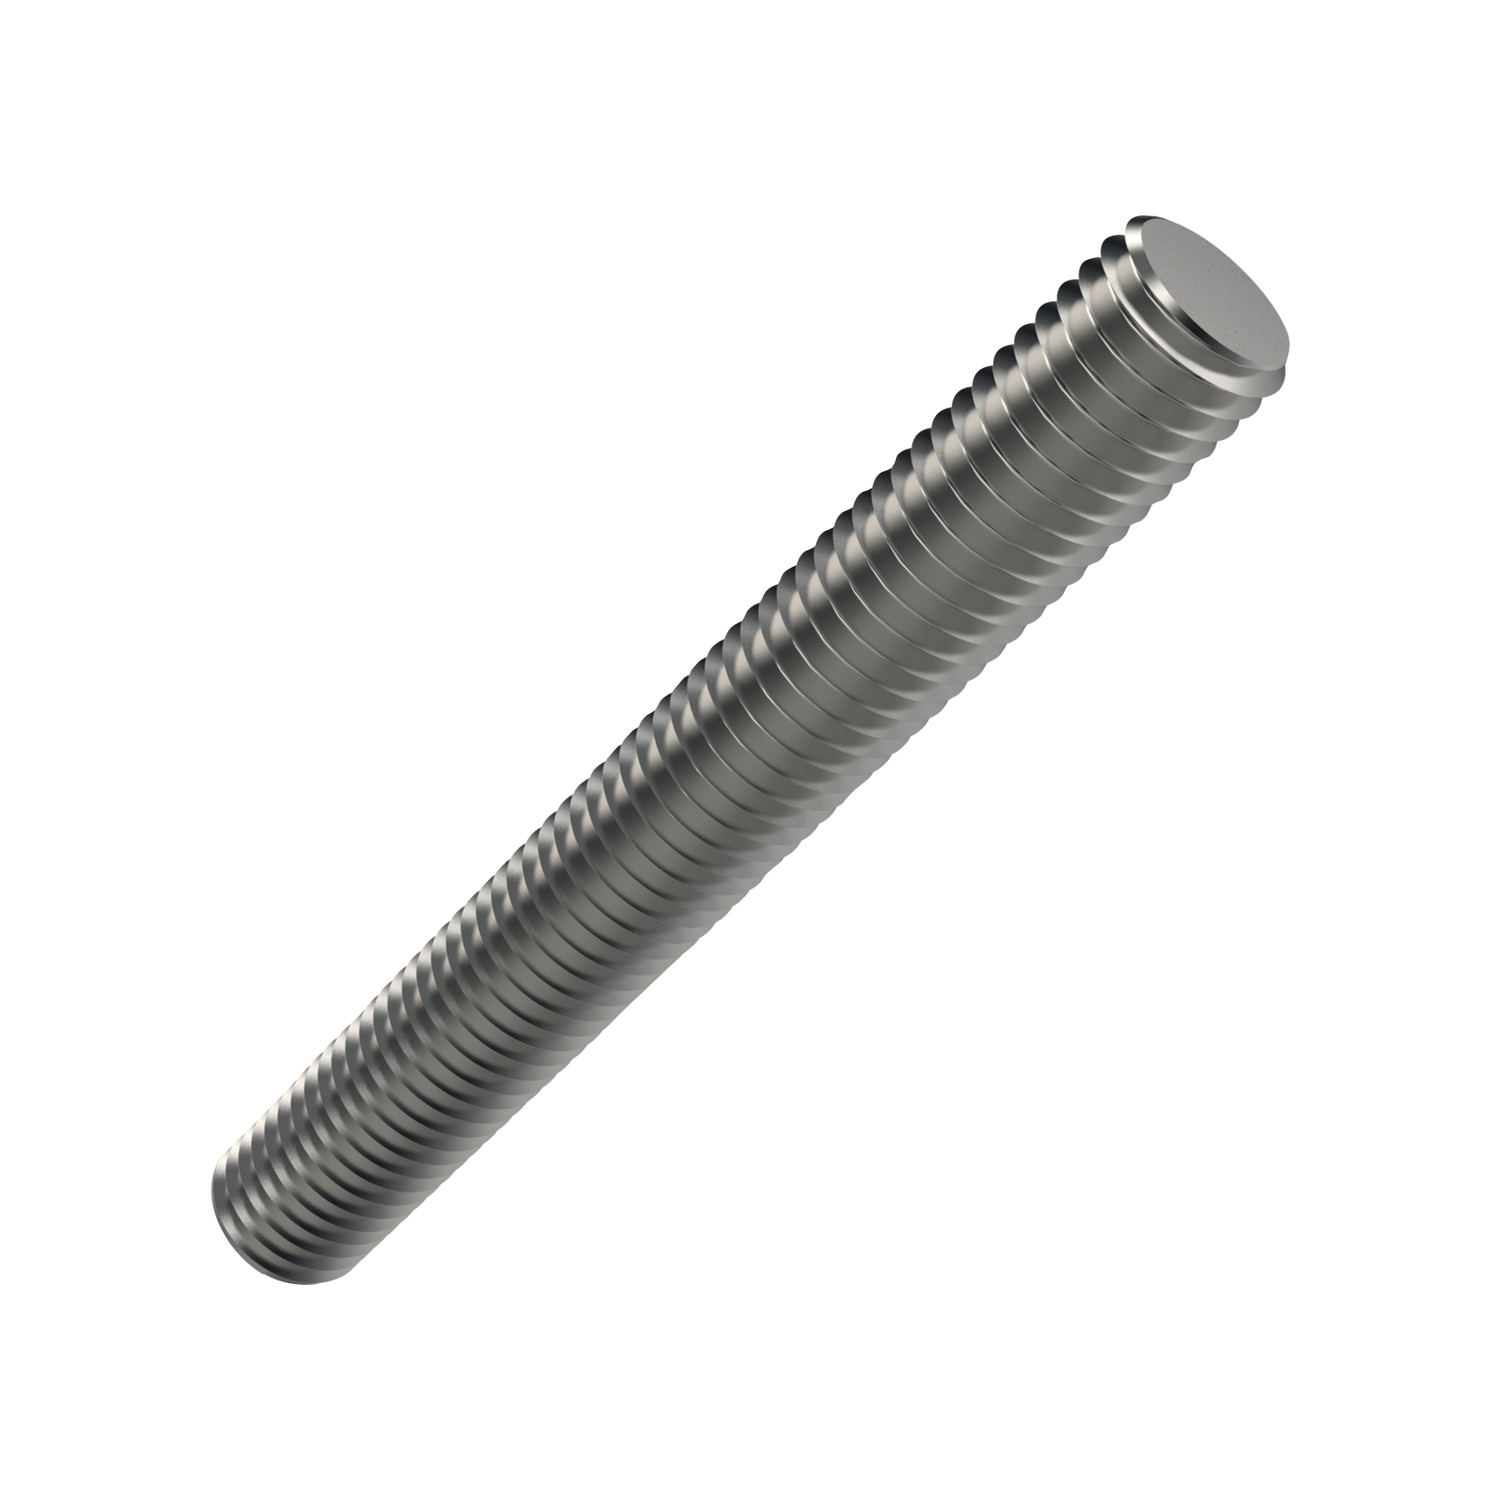 P0290.SS - Stainless Threaded Rod